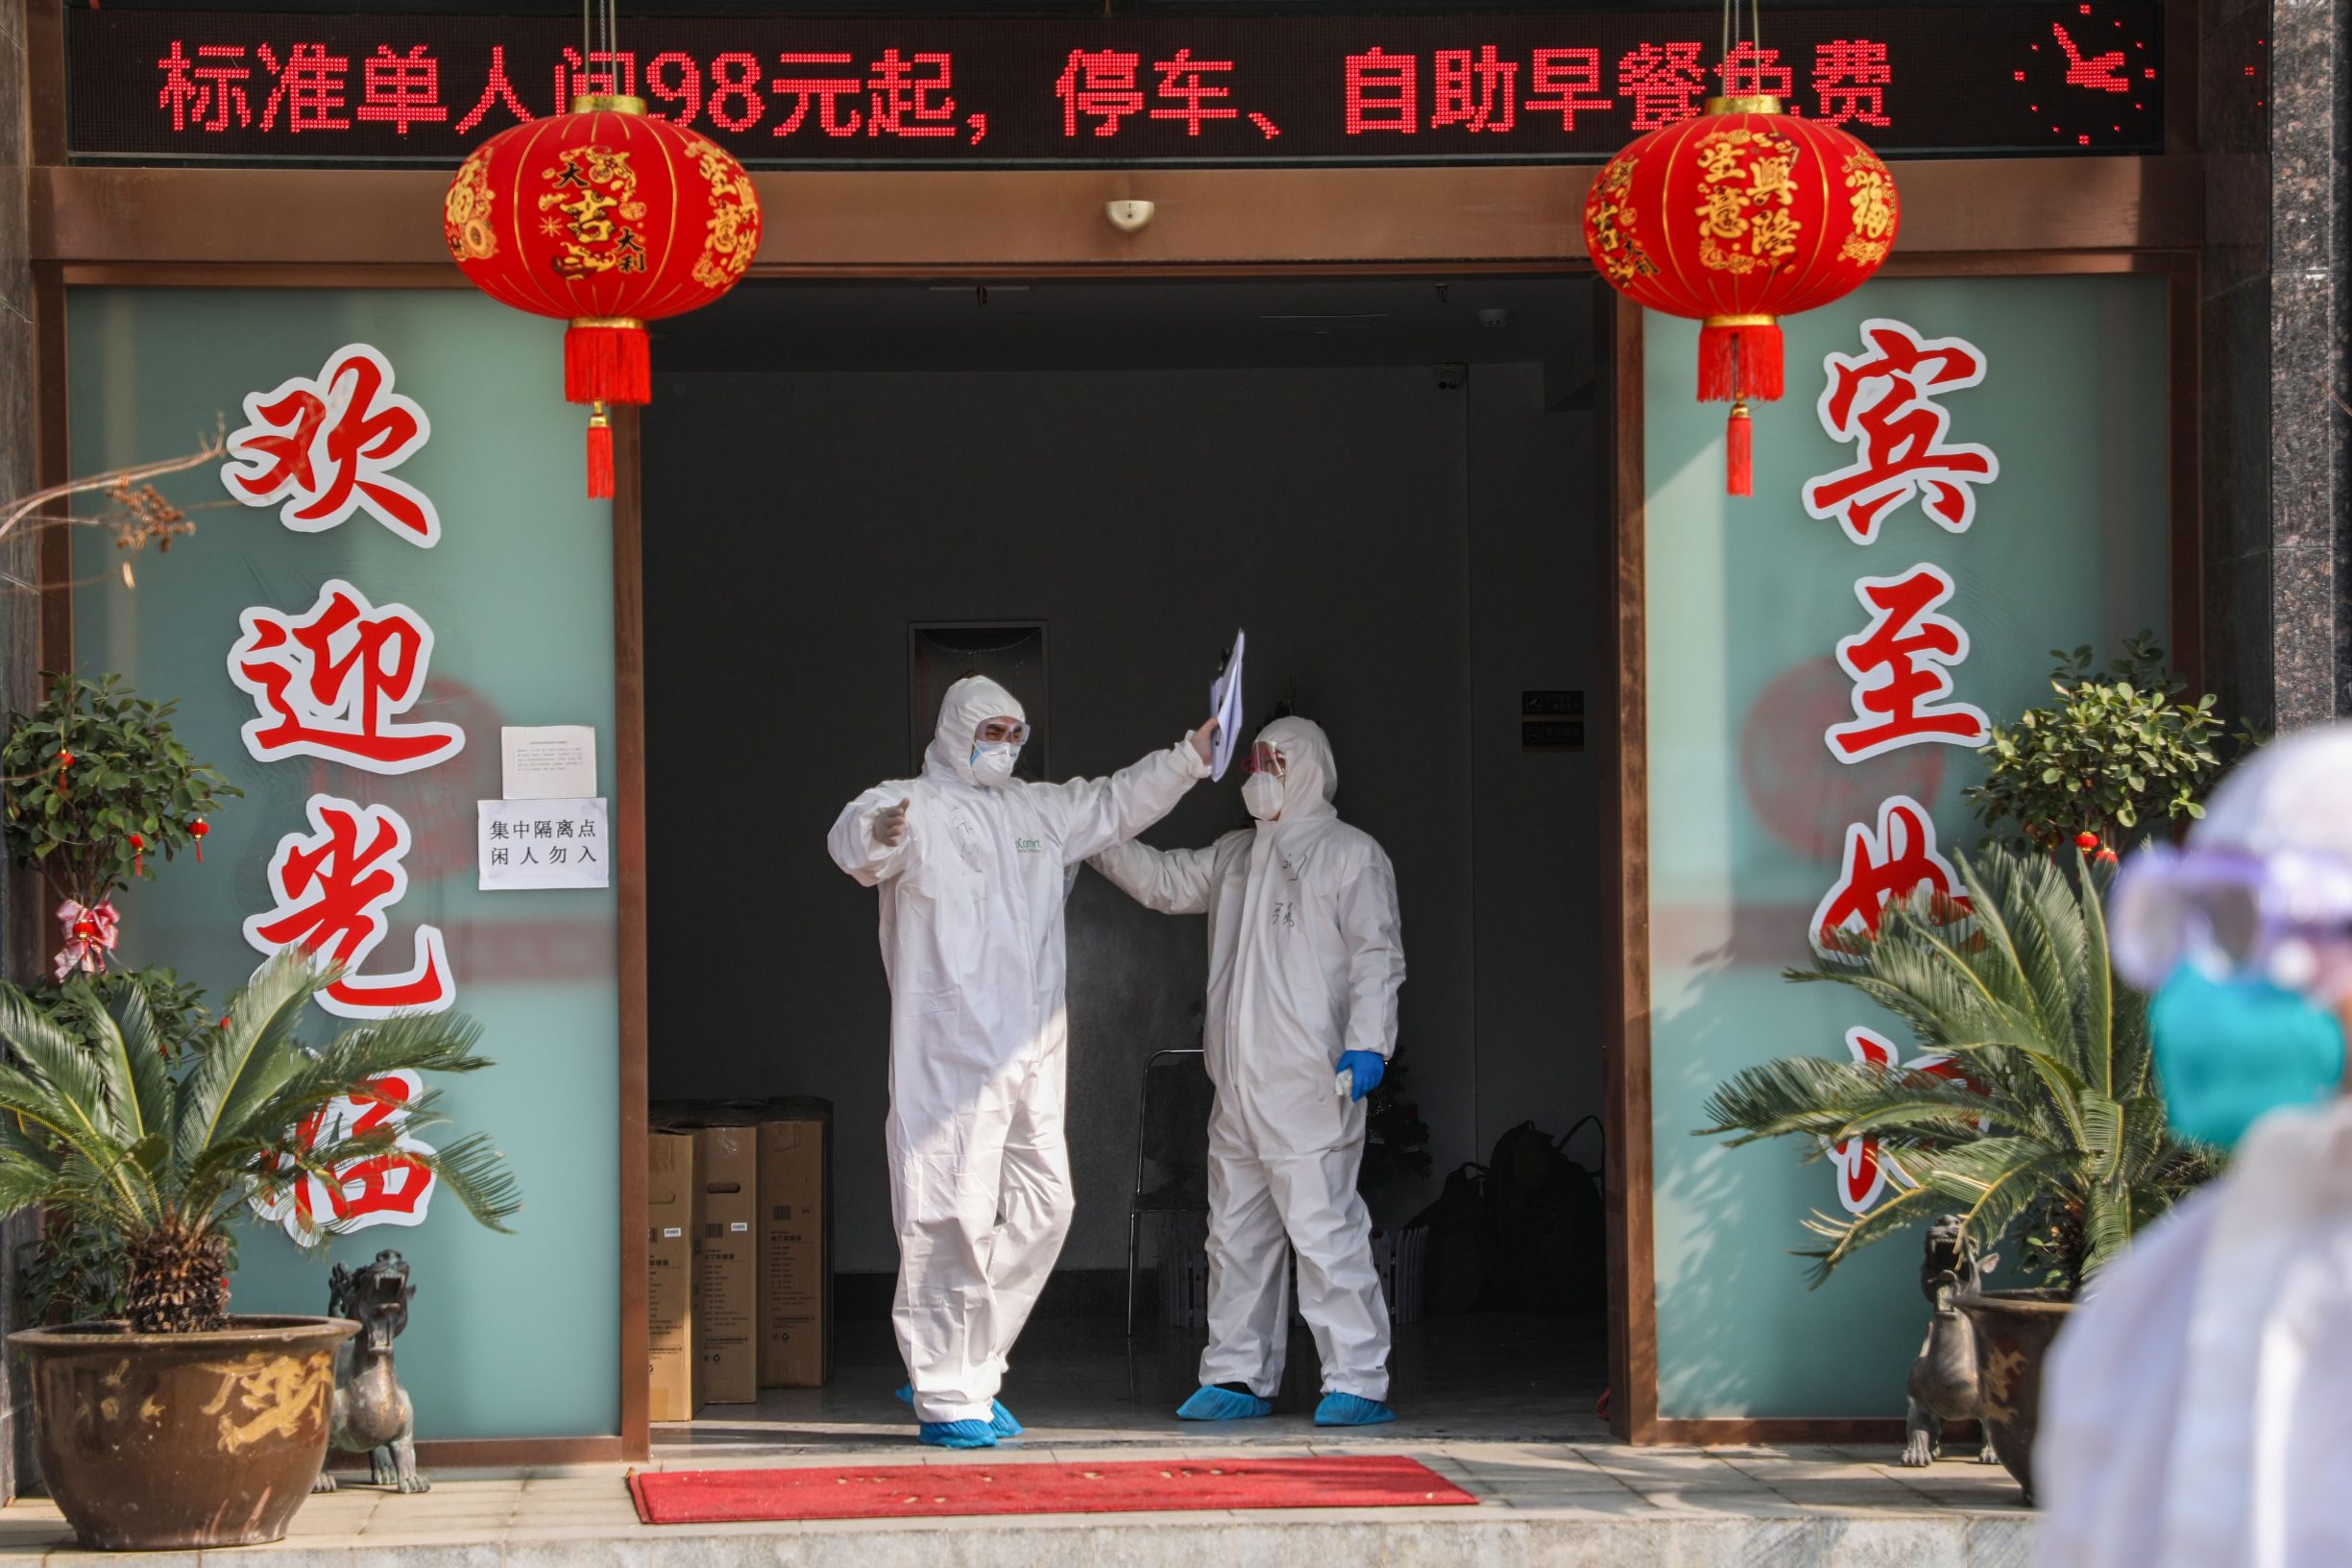 This photo taken on February 3, 2020 shows a medical staff member (L) being disinfected by a colleague before leaving a quarantine zone converted from a hotel in Wuhan, the epicentre of the new coronavirus outbreak, in China's central Hubei province. - The number of total infections in China's coronavirus outbreak has passed 20,400 nationwide with 3,235 new cases confirmed, the National Health Commission said on February 4. (Photo by STR / AFP) / China OUT